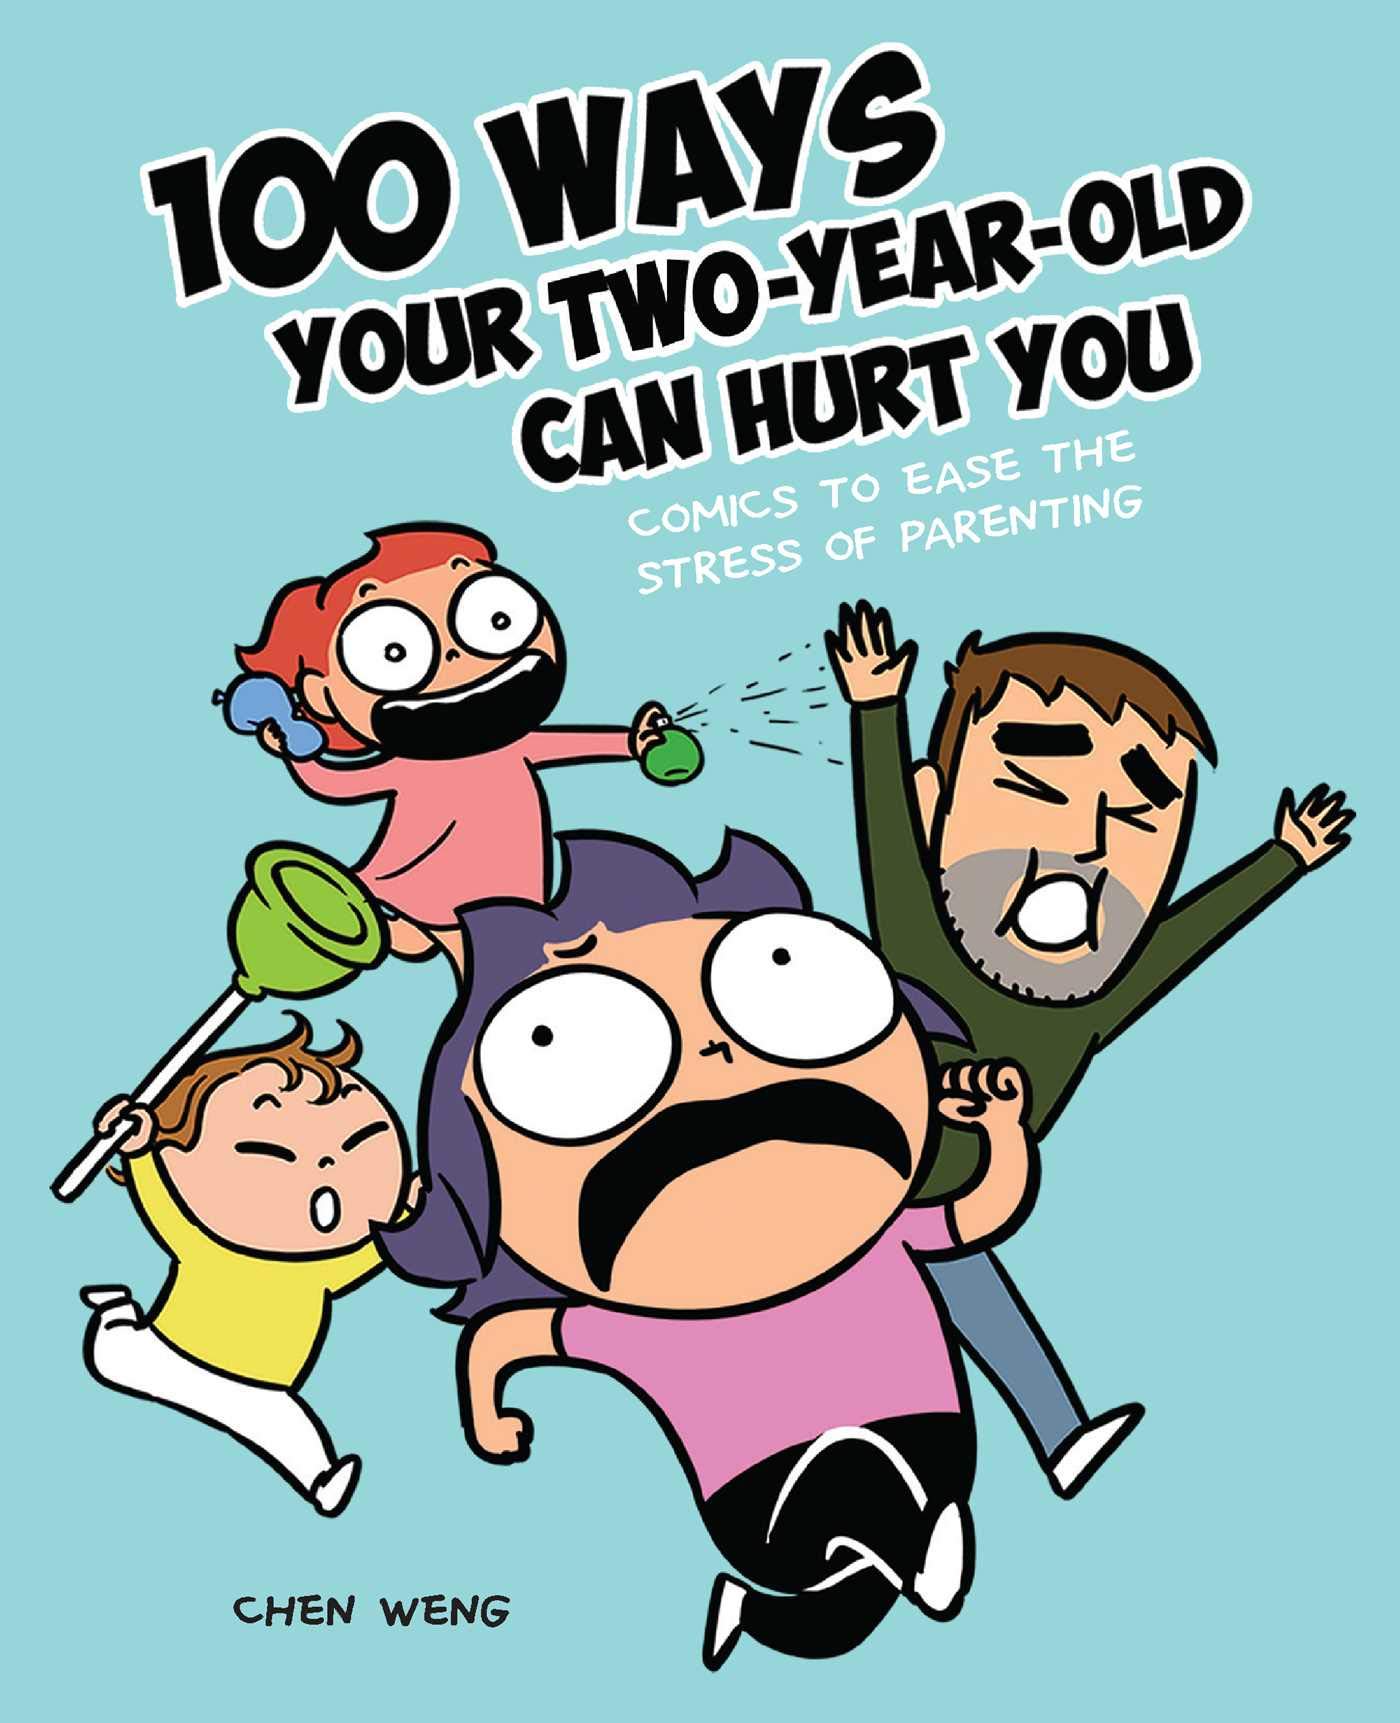 100 Ways Your Two-Year-Old Can Hurt You | Chen Weng